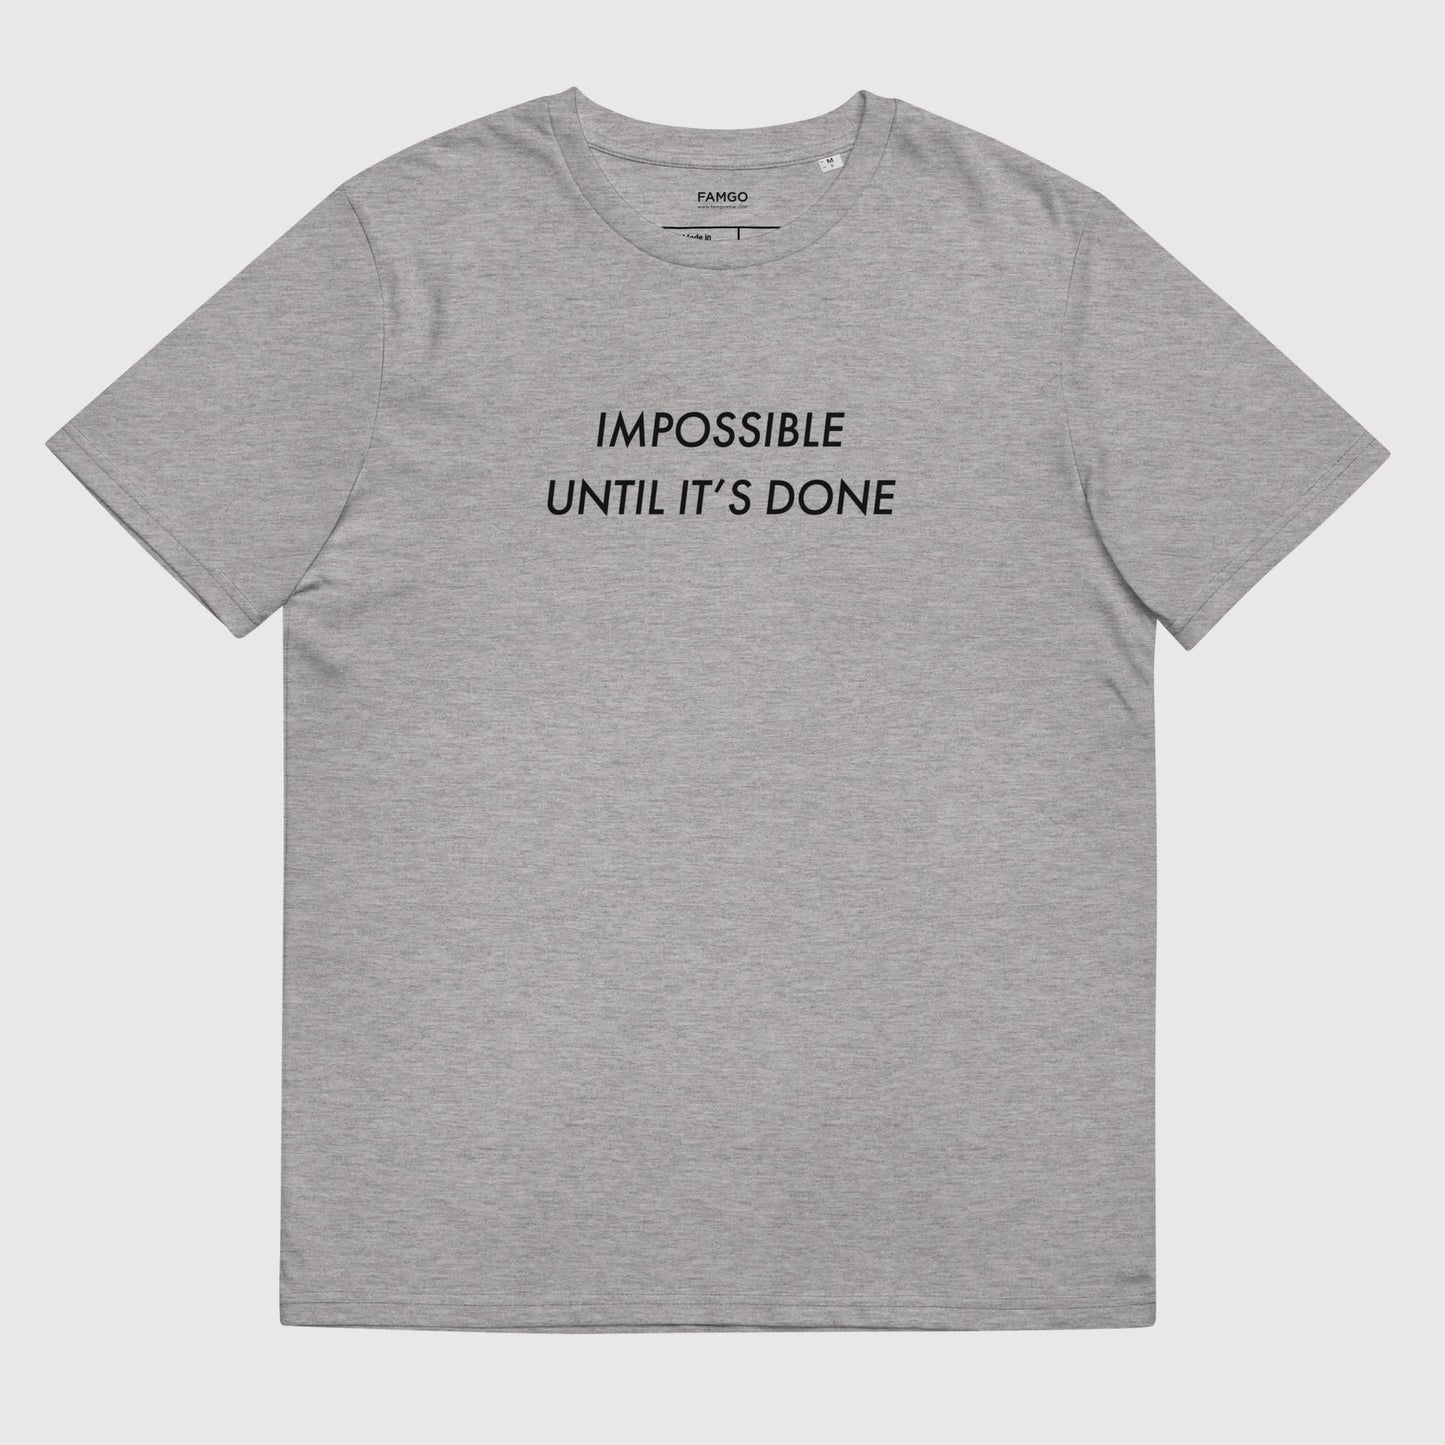 Men's light gray organic cotton t-shirt that features, "Impossible Until It's Done," inspired by Nelson Mandela's inspirational quote, "It always seems impossible until it's done."